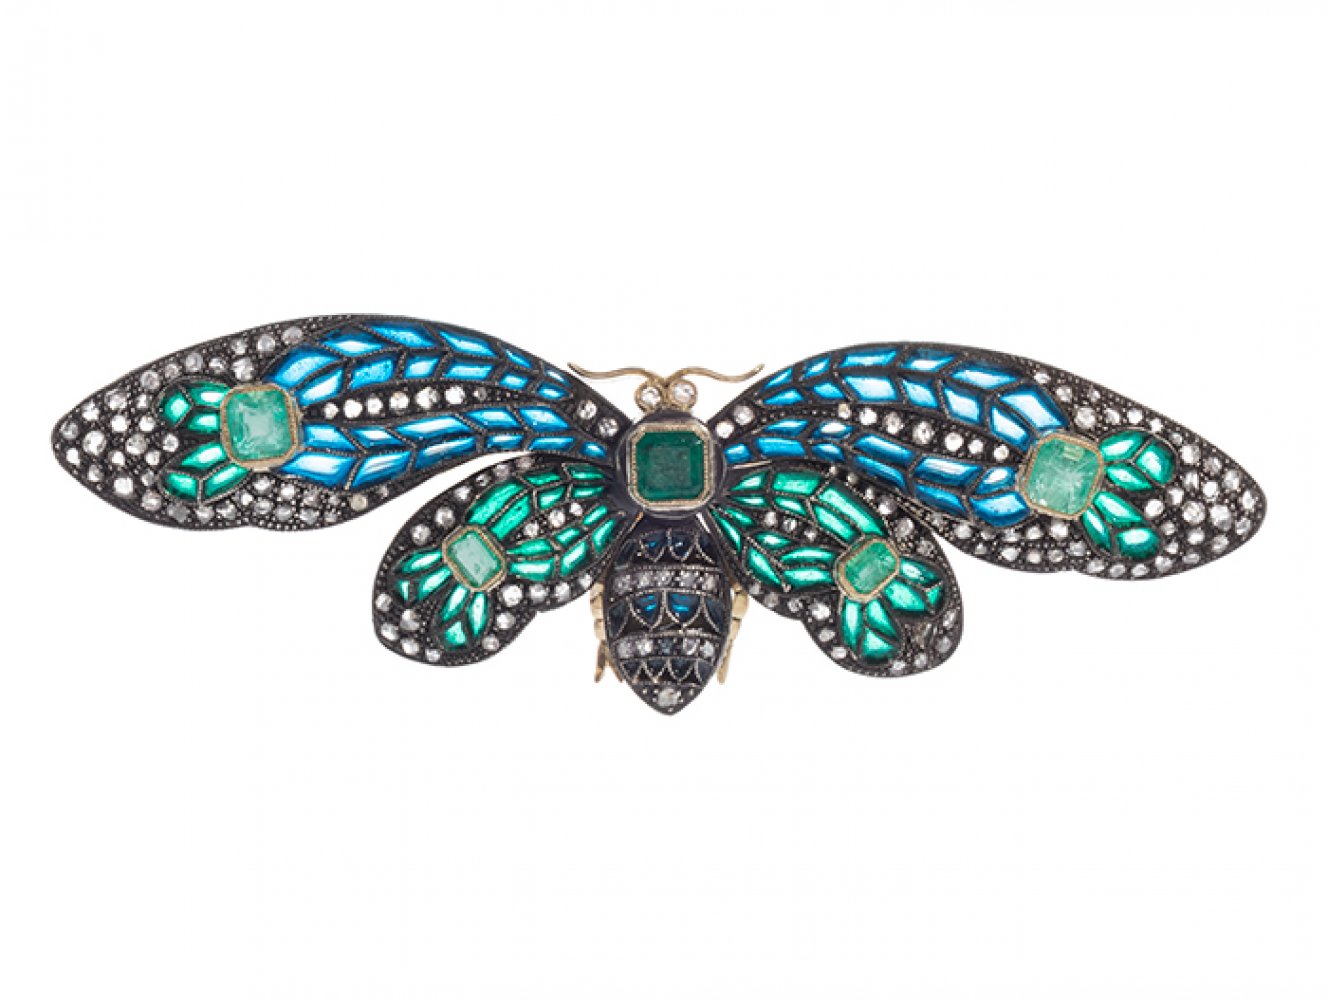 Butterfly-shaped brooch, modernist style, 20th century. In 18k yellow gold with silver views.